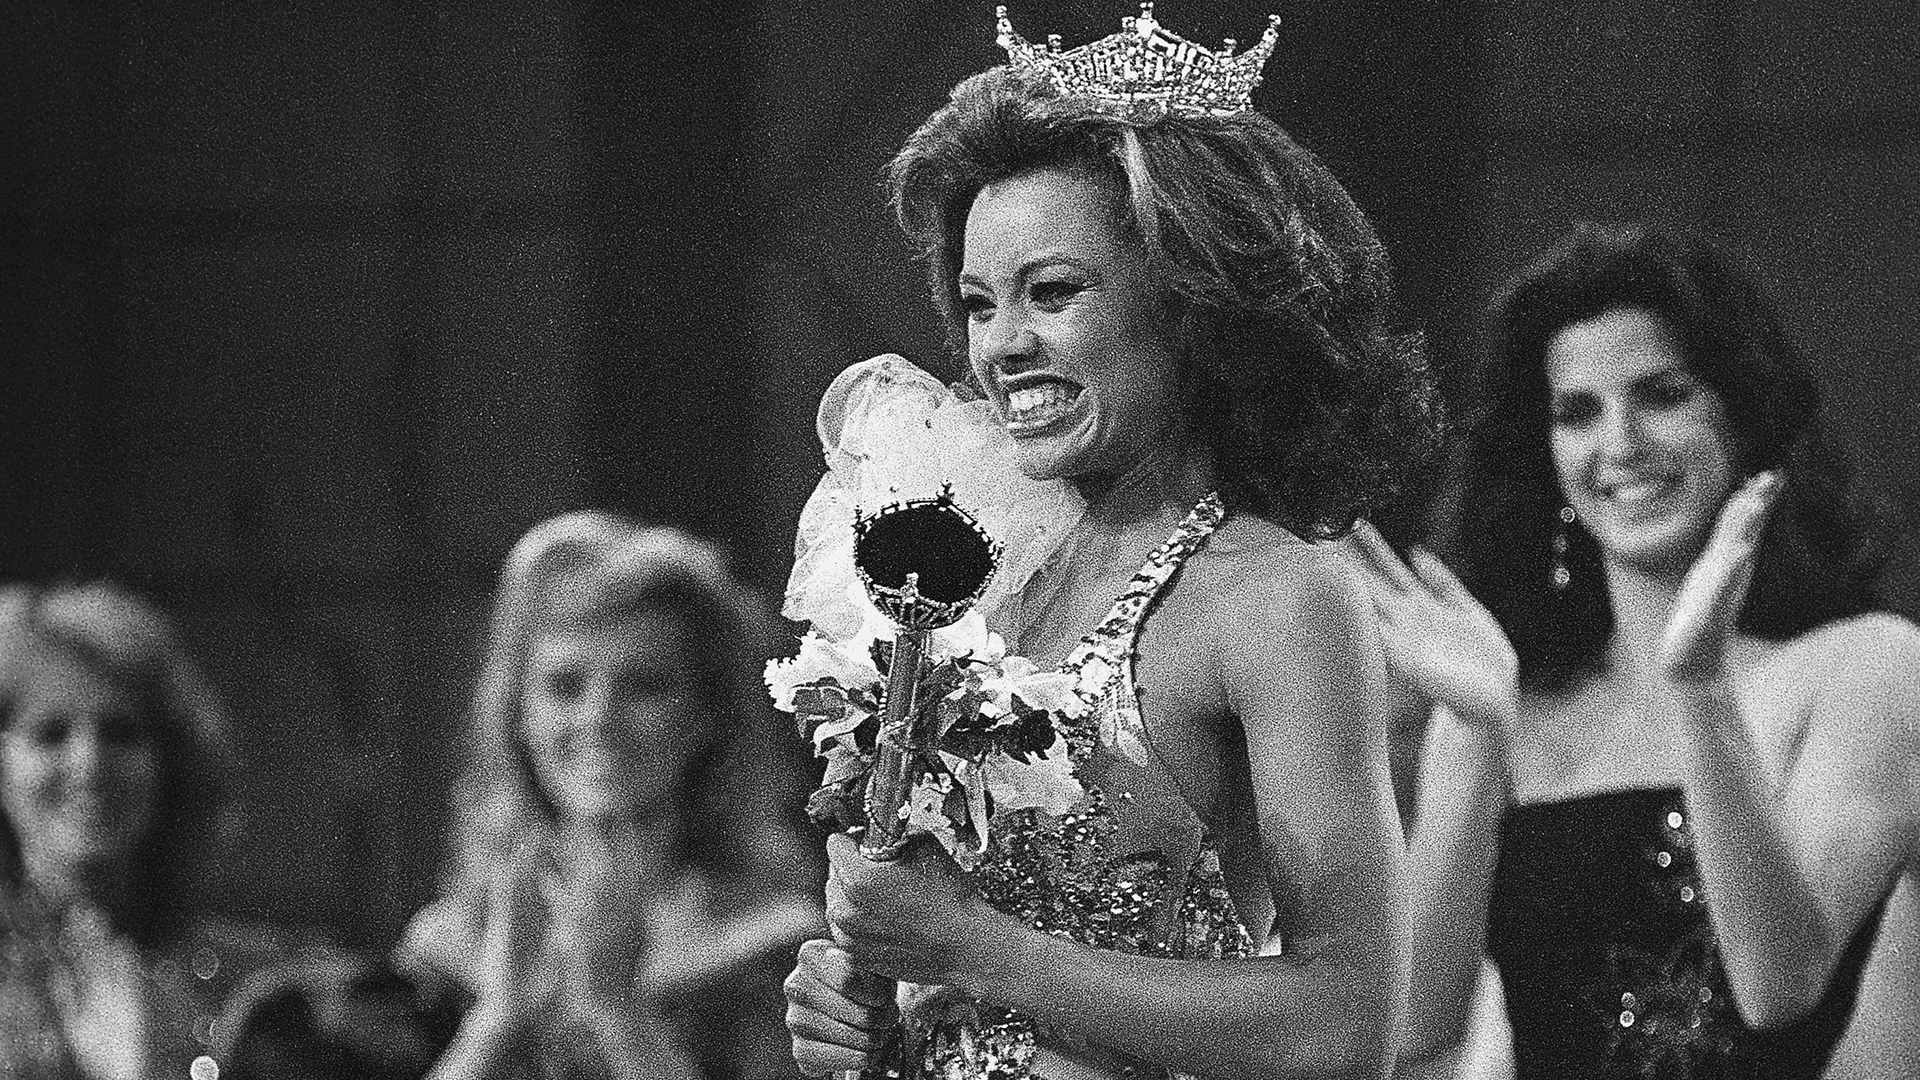 September 17, 1983: Vanessa Williams Was the First African-American Woman Crowned Miss America